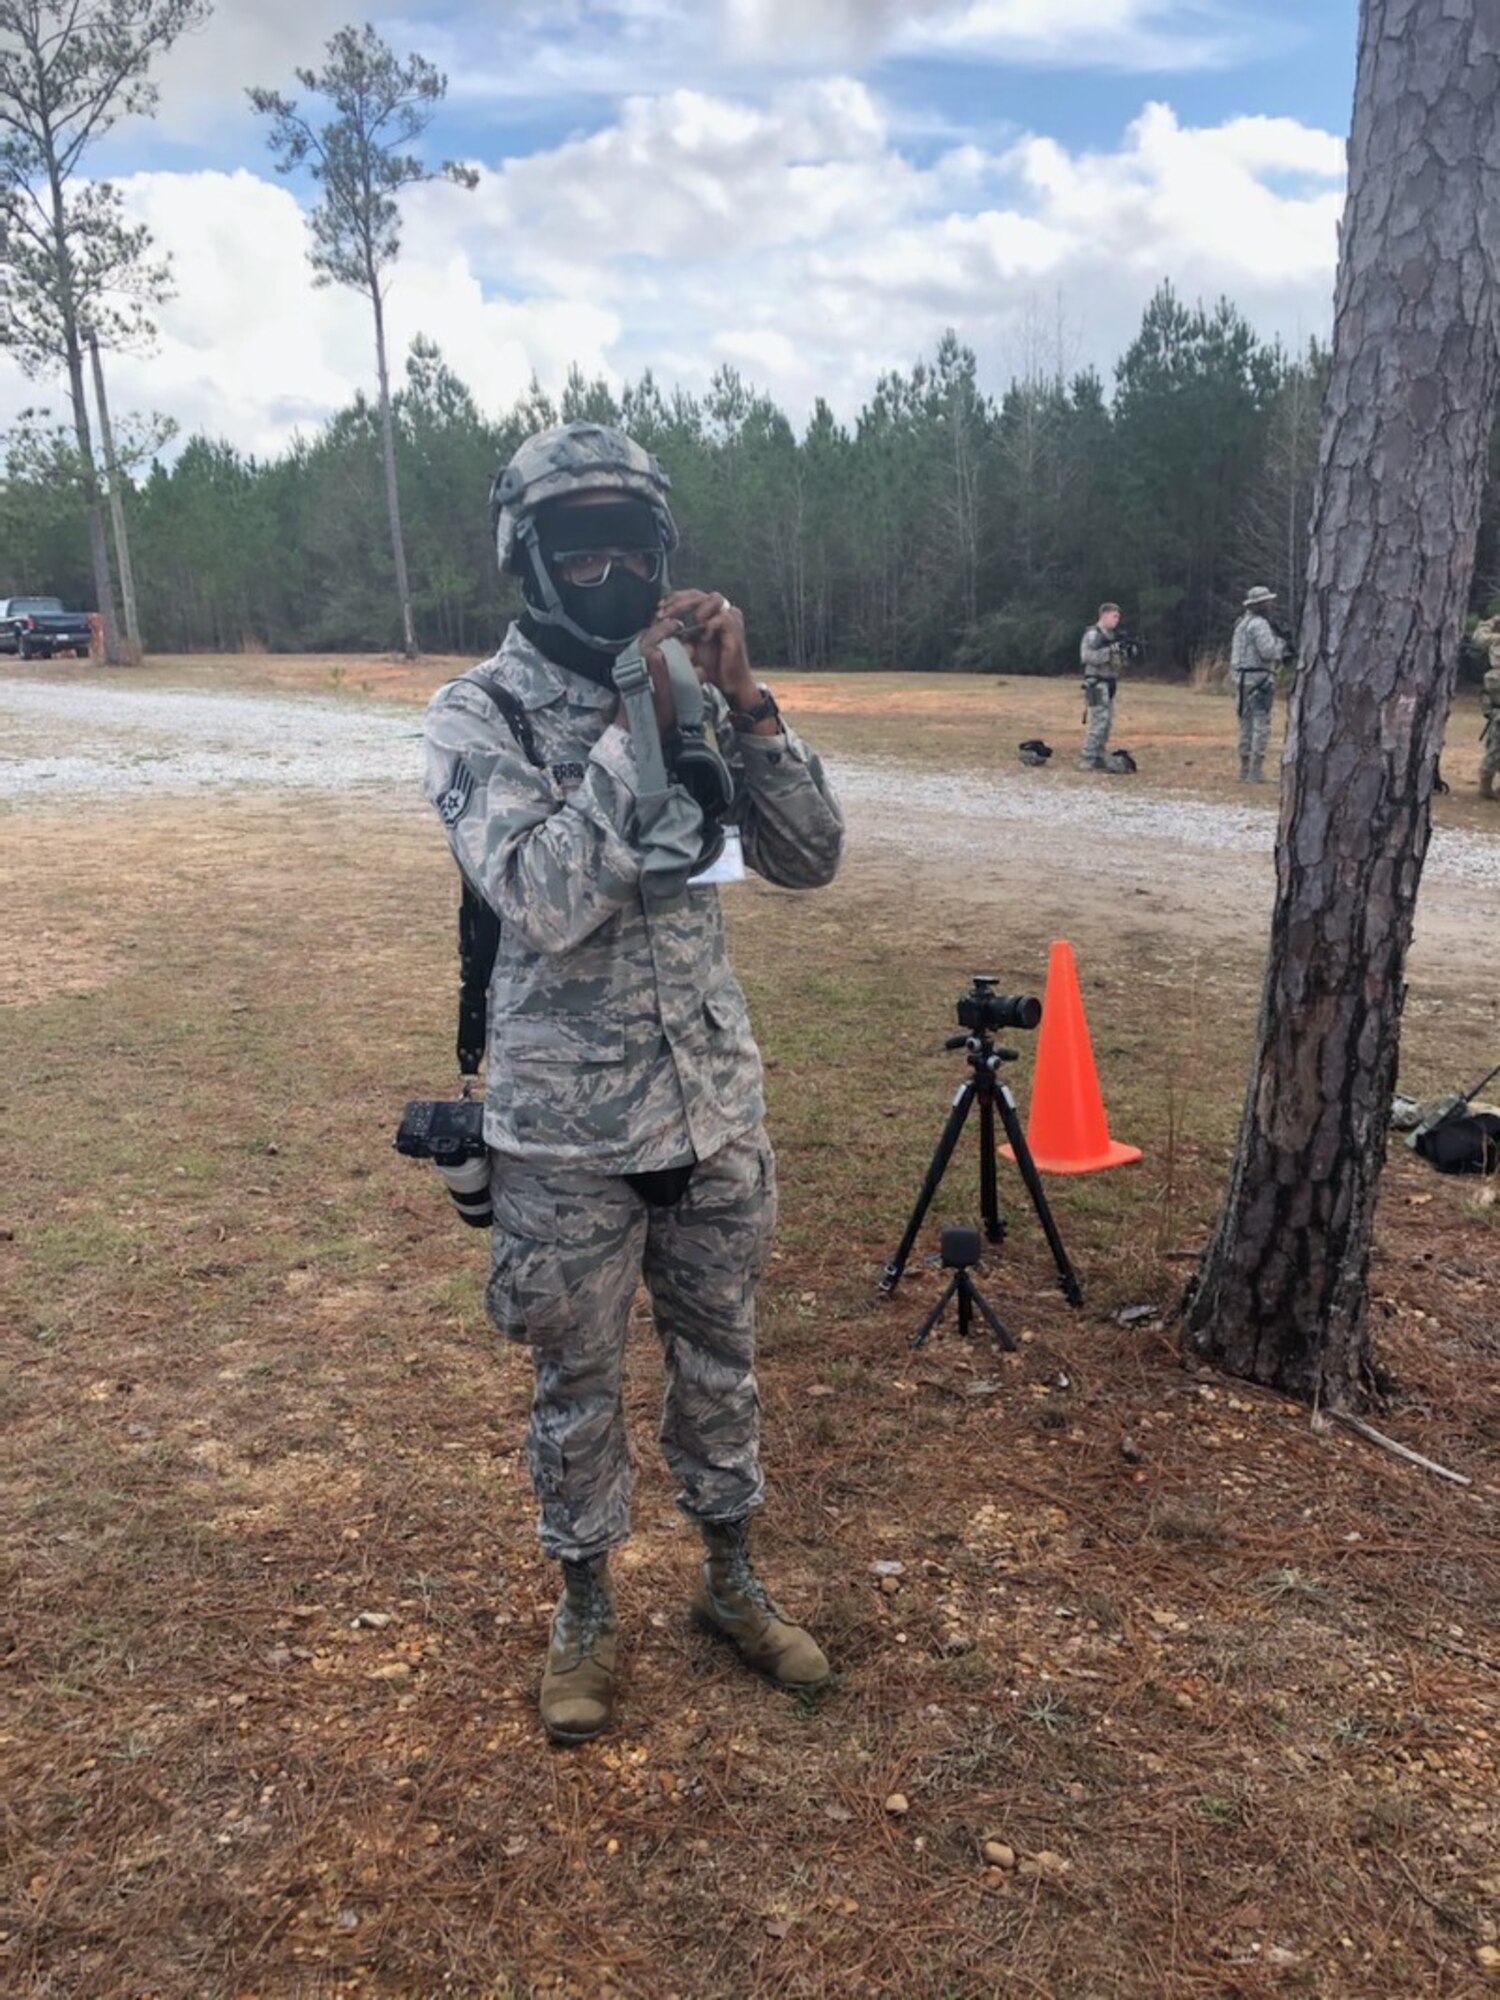 Staff Sgt. Shelton Sherrill, 403rd Wing public affairs specialist, puts a Kevlar helmet on before entering the exercise field during Operation Southern Comfort. Sherrill photographed members of the 403rd Security Forces during the exercise. (U.S. Air Force photo by Maj. Jonathan Brady)